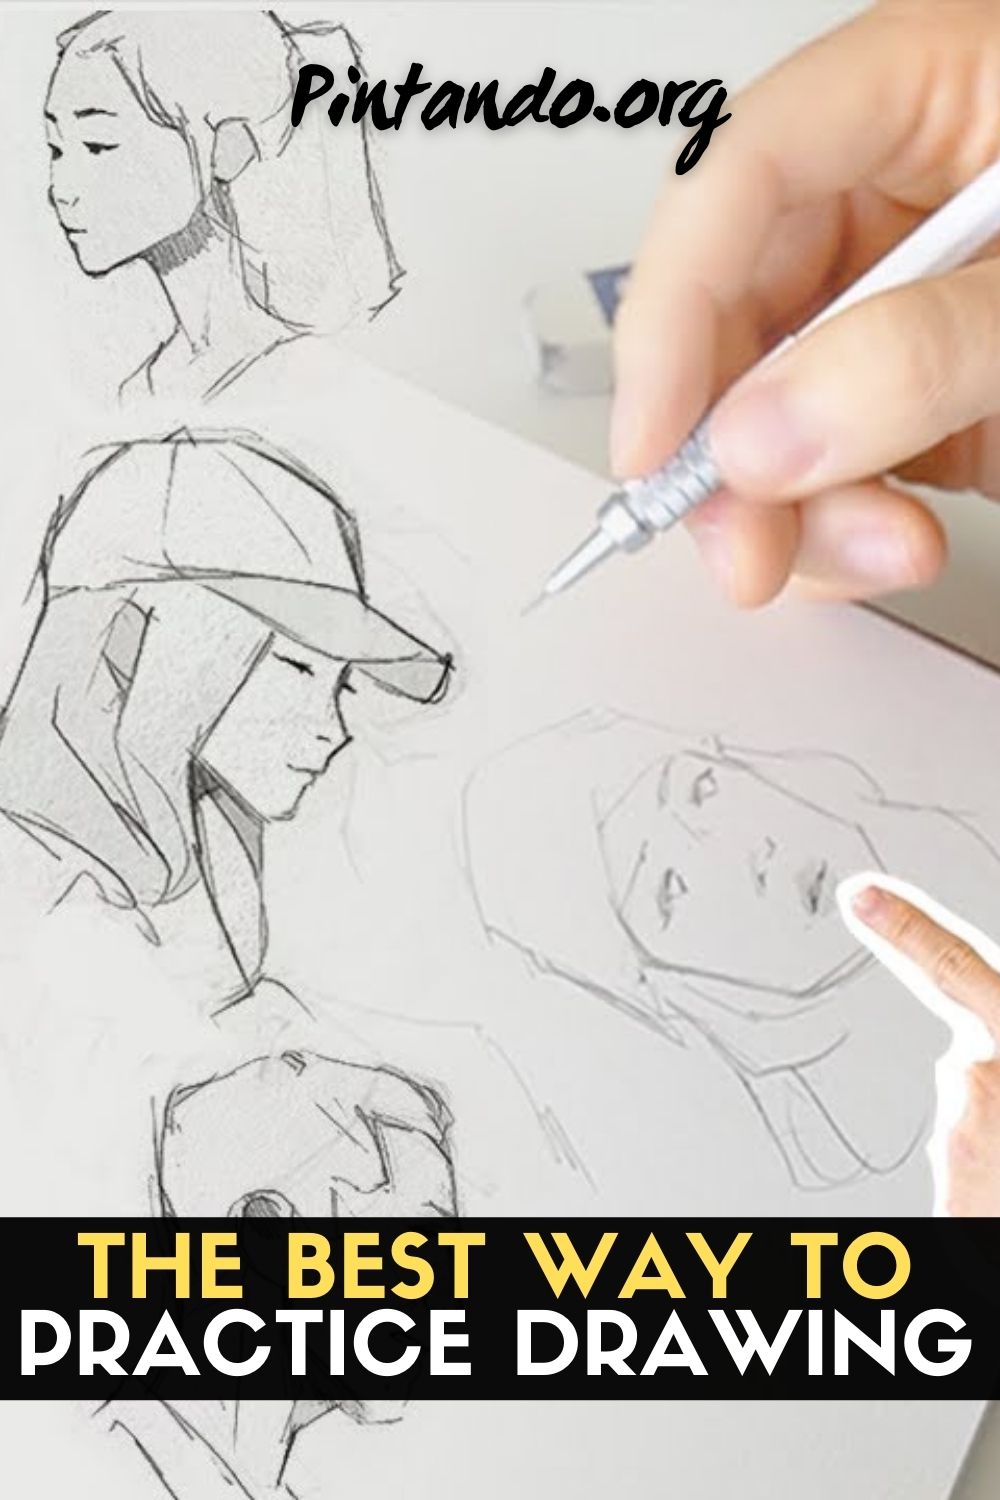 THE BEST WAY TO PRACTICE DRAWING (1)